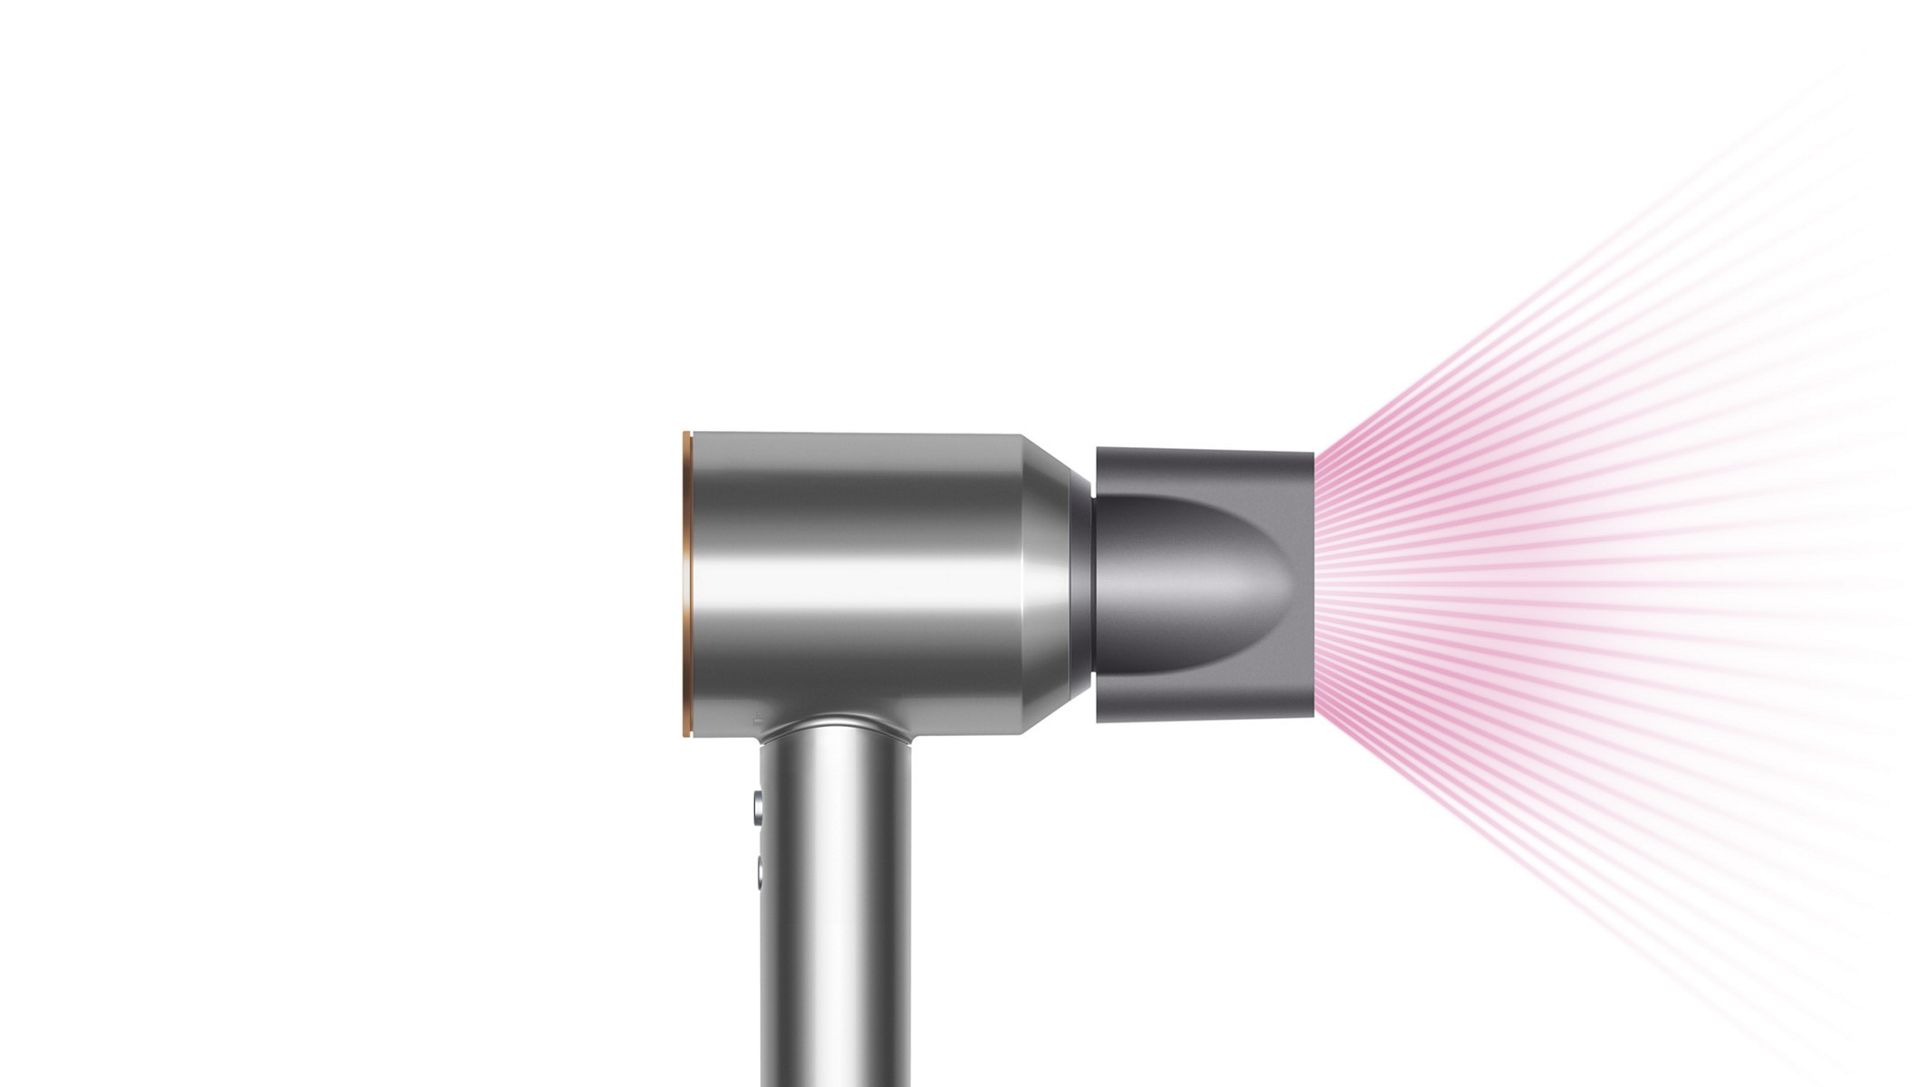 Dyson Supersonic with Smoothing nozzle.